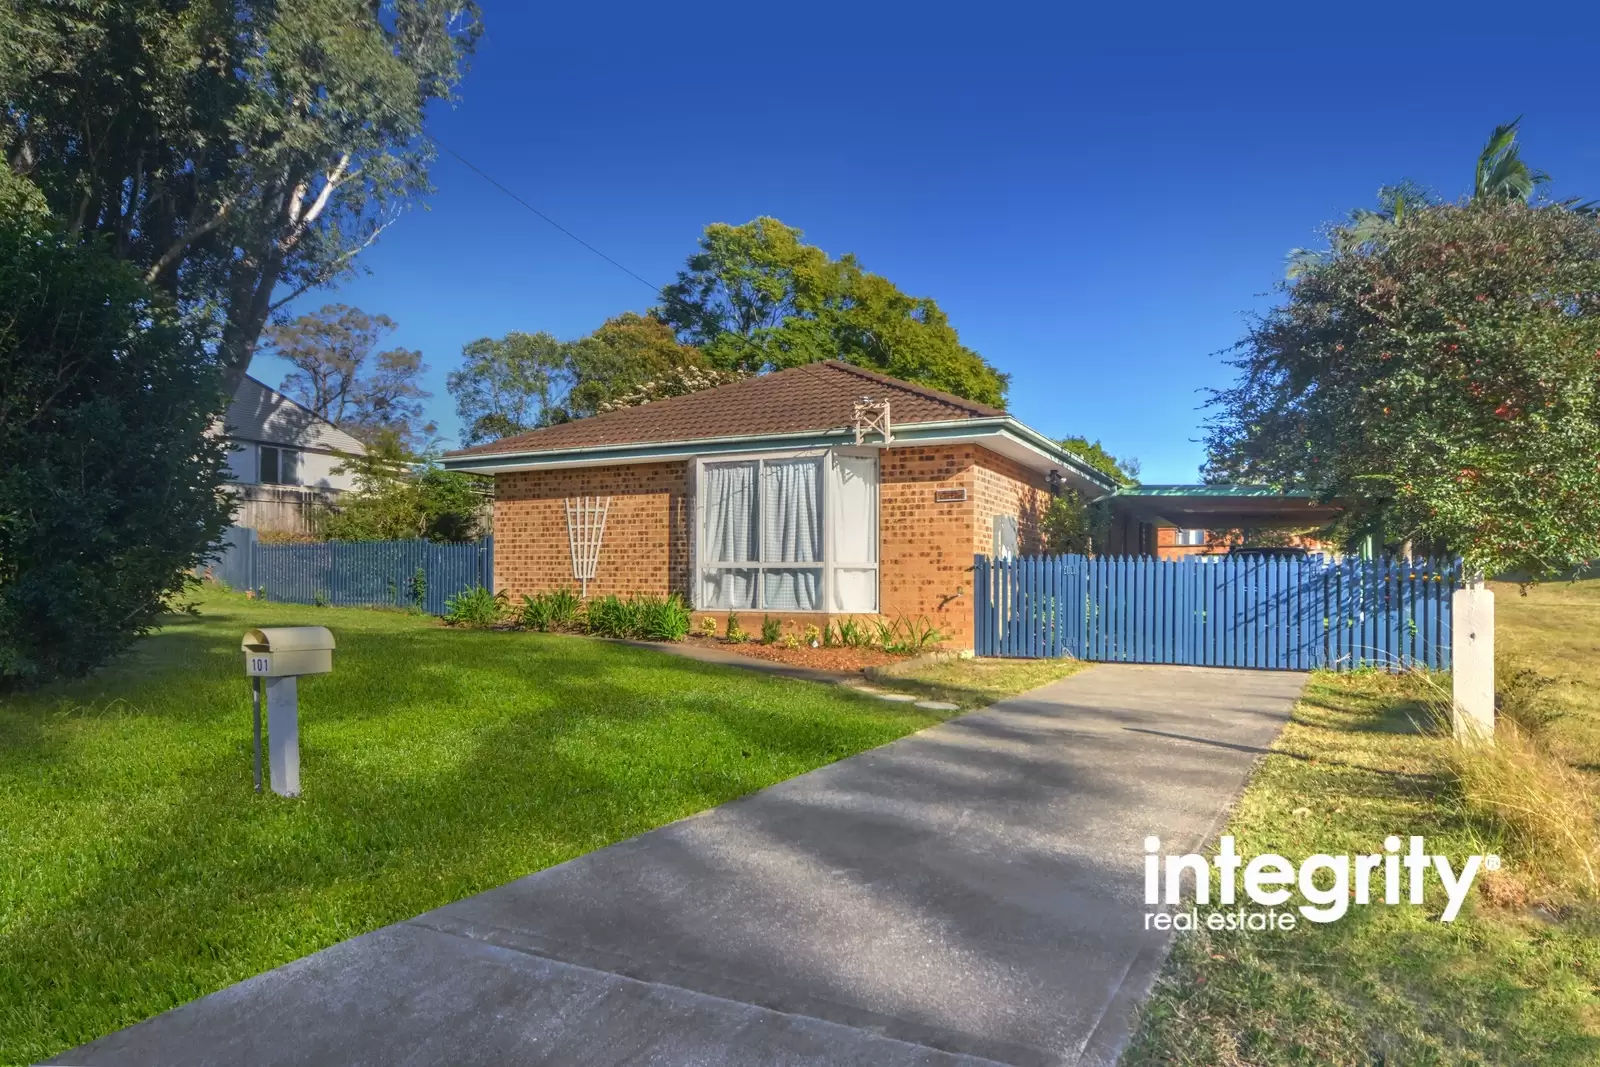 101 Meroo Road, Bomaderry Sold by Integrity Real Estate - image 1